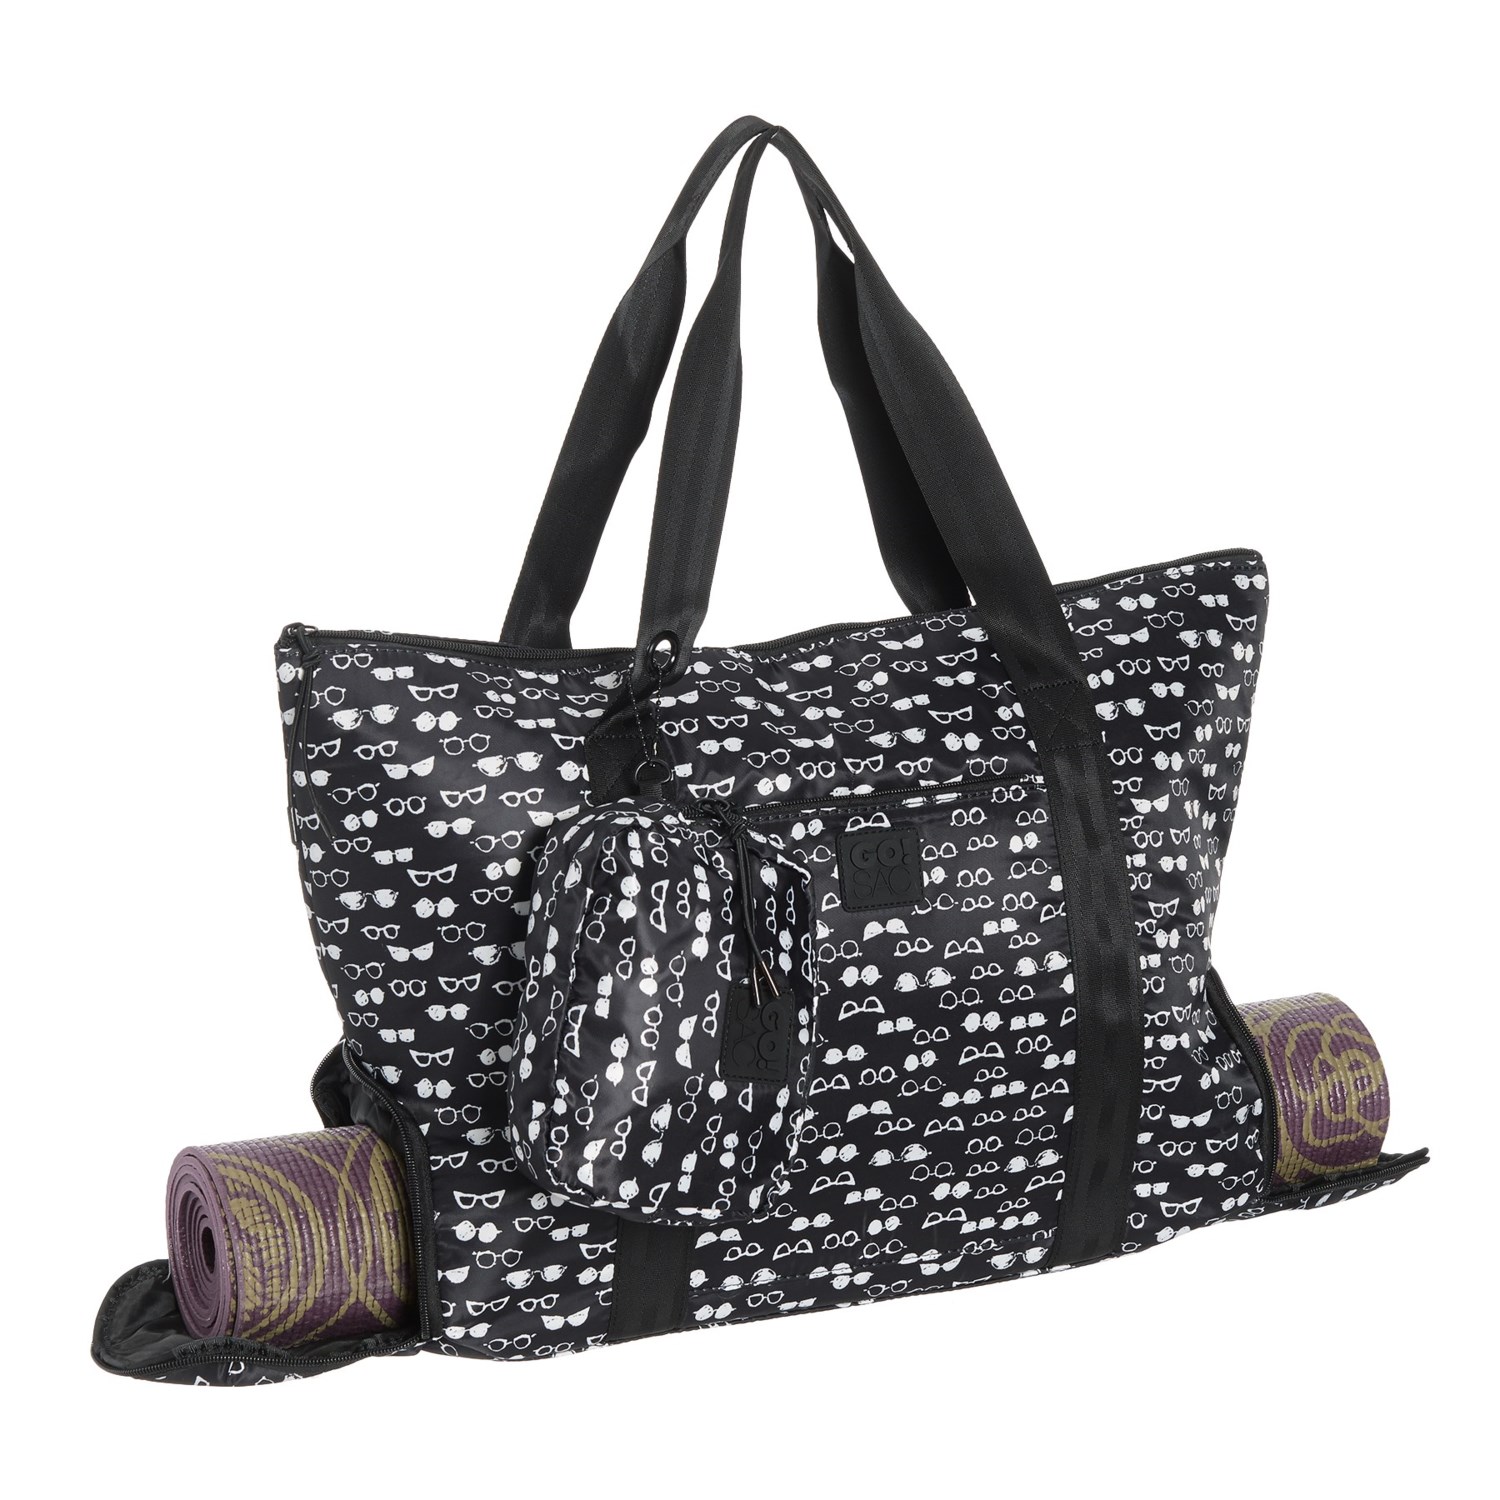 Go! Sac The Sport Tote Bag (For Women) - Save 74%